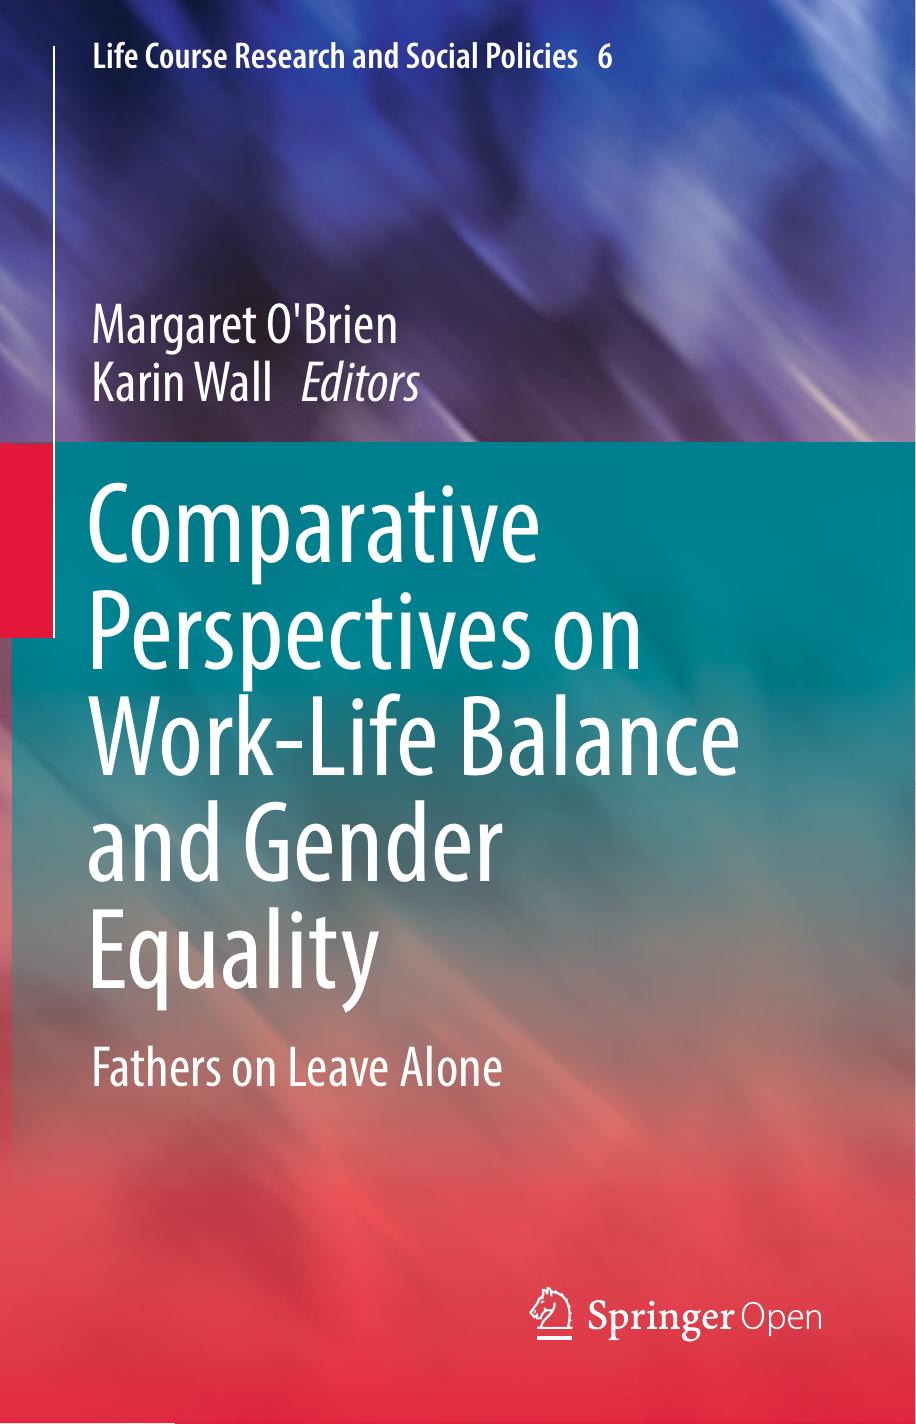 Comparative Perspectives on Work-Life Balance and Gender Equality by Margaret O'Brien & Karin Wall